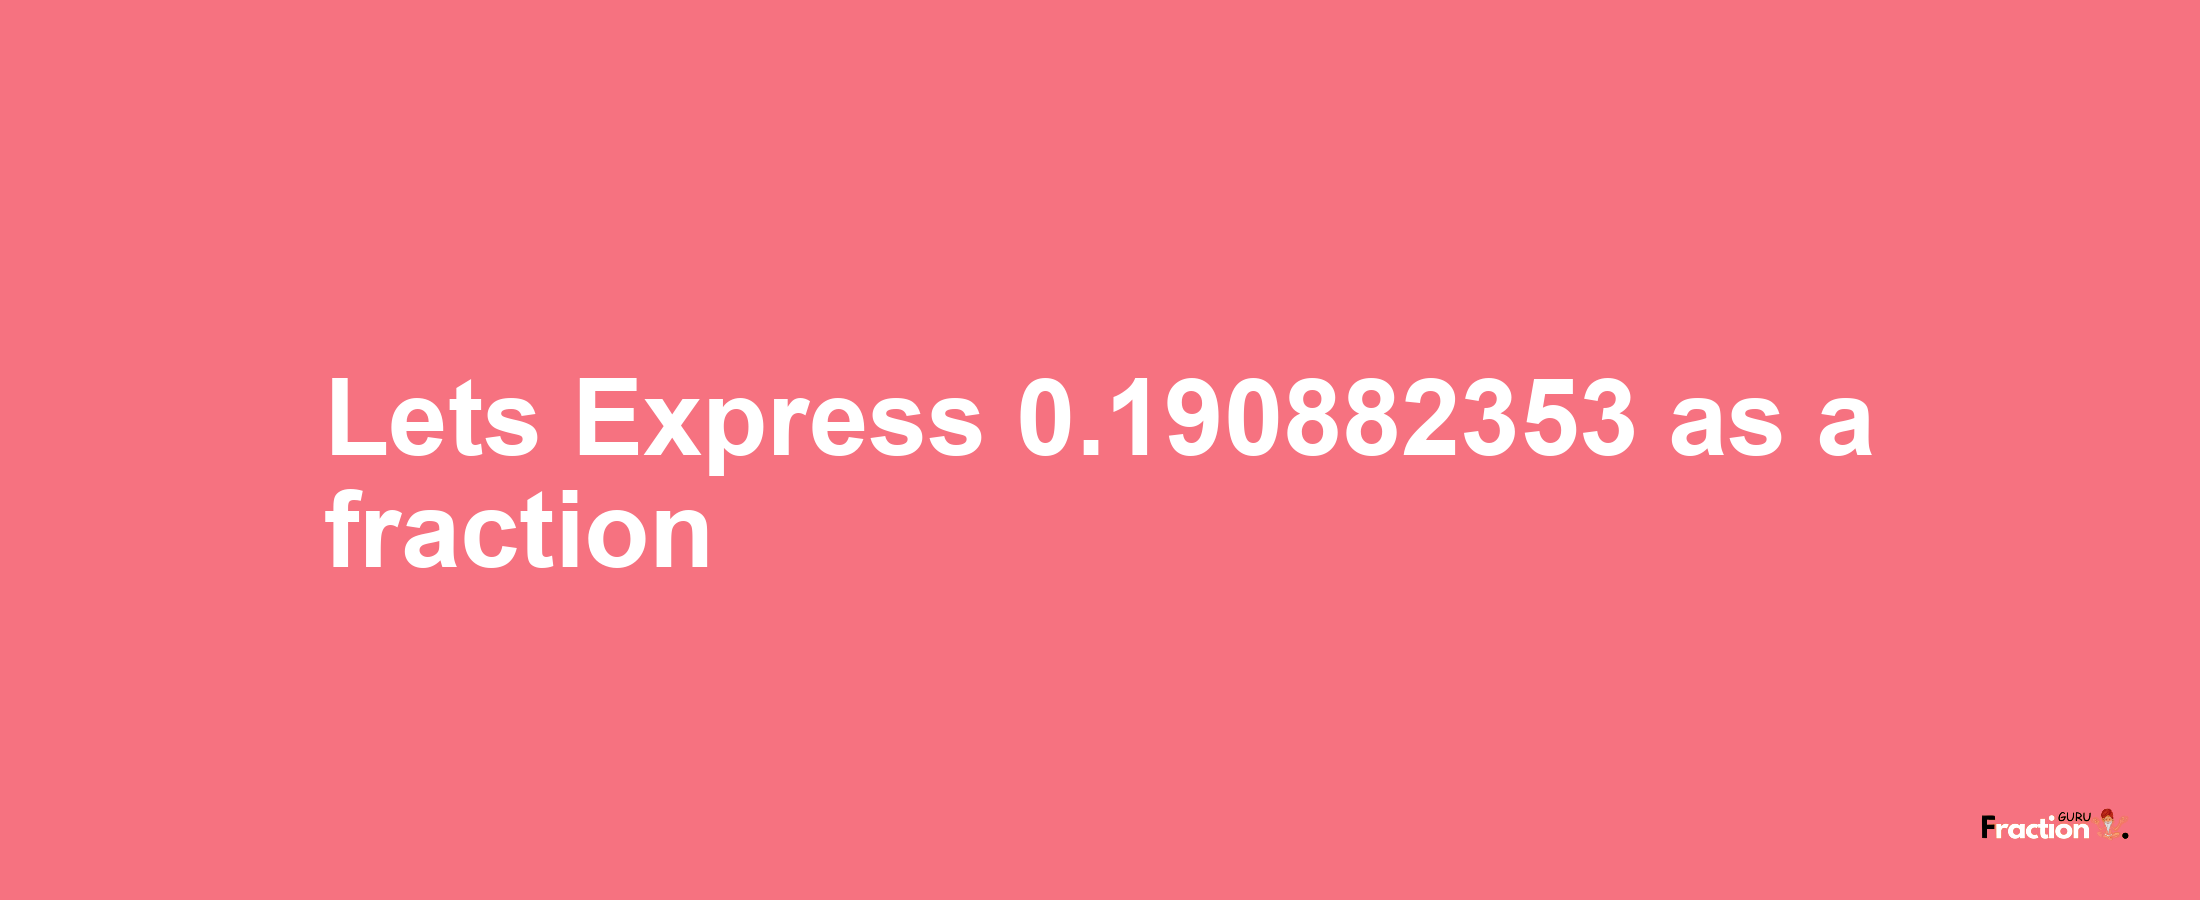 Lets Express 0.190882353 as afraction